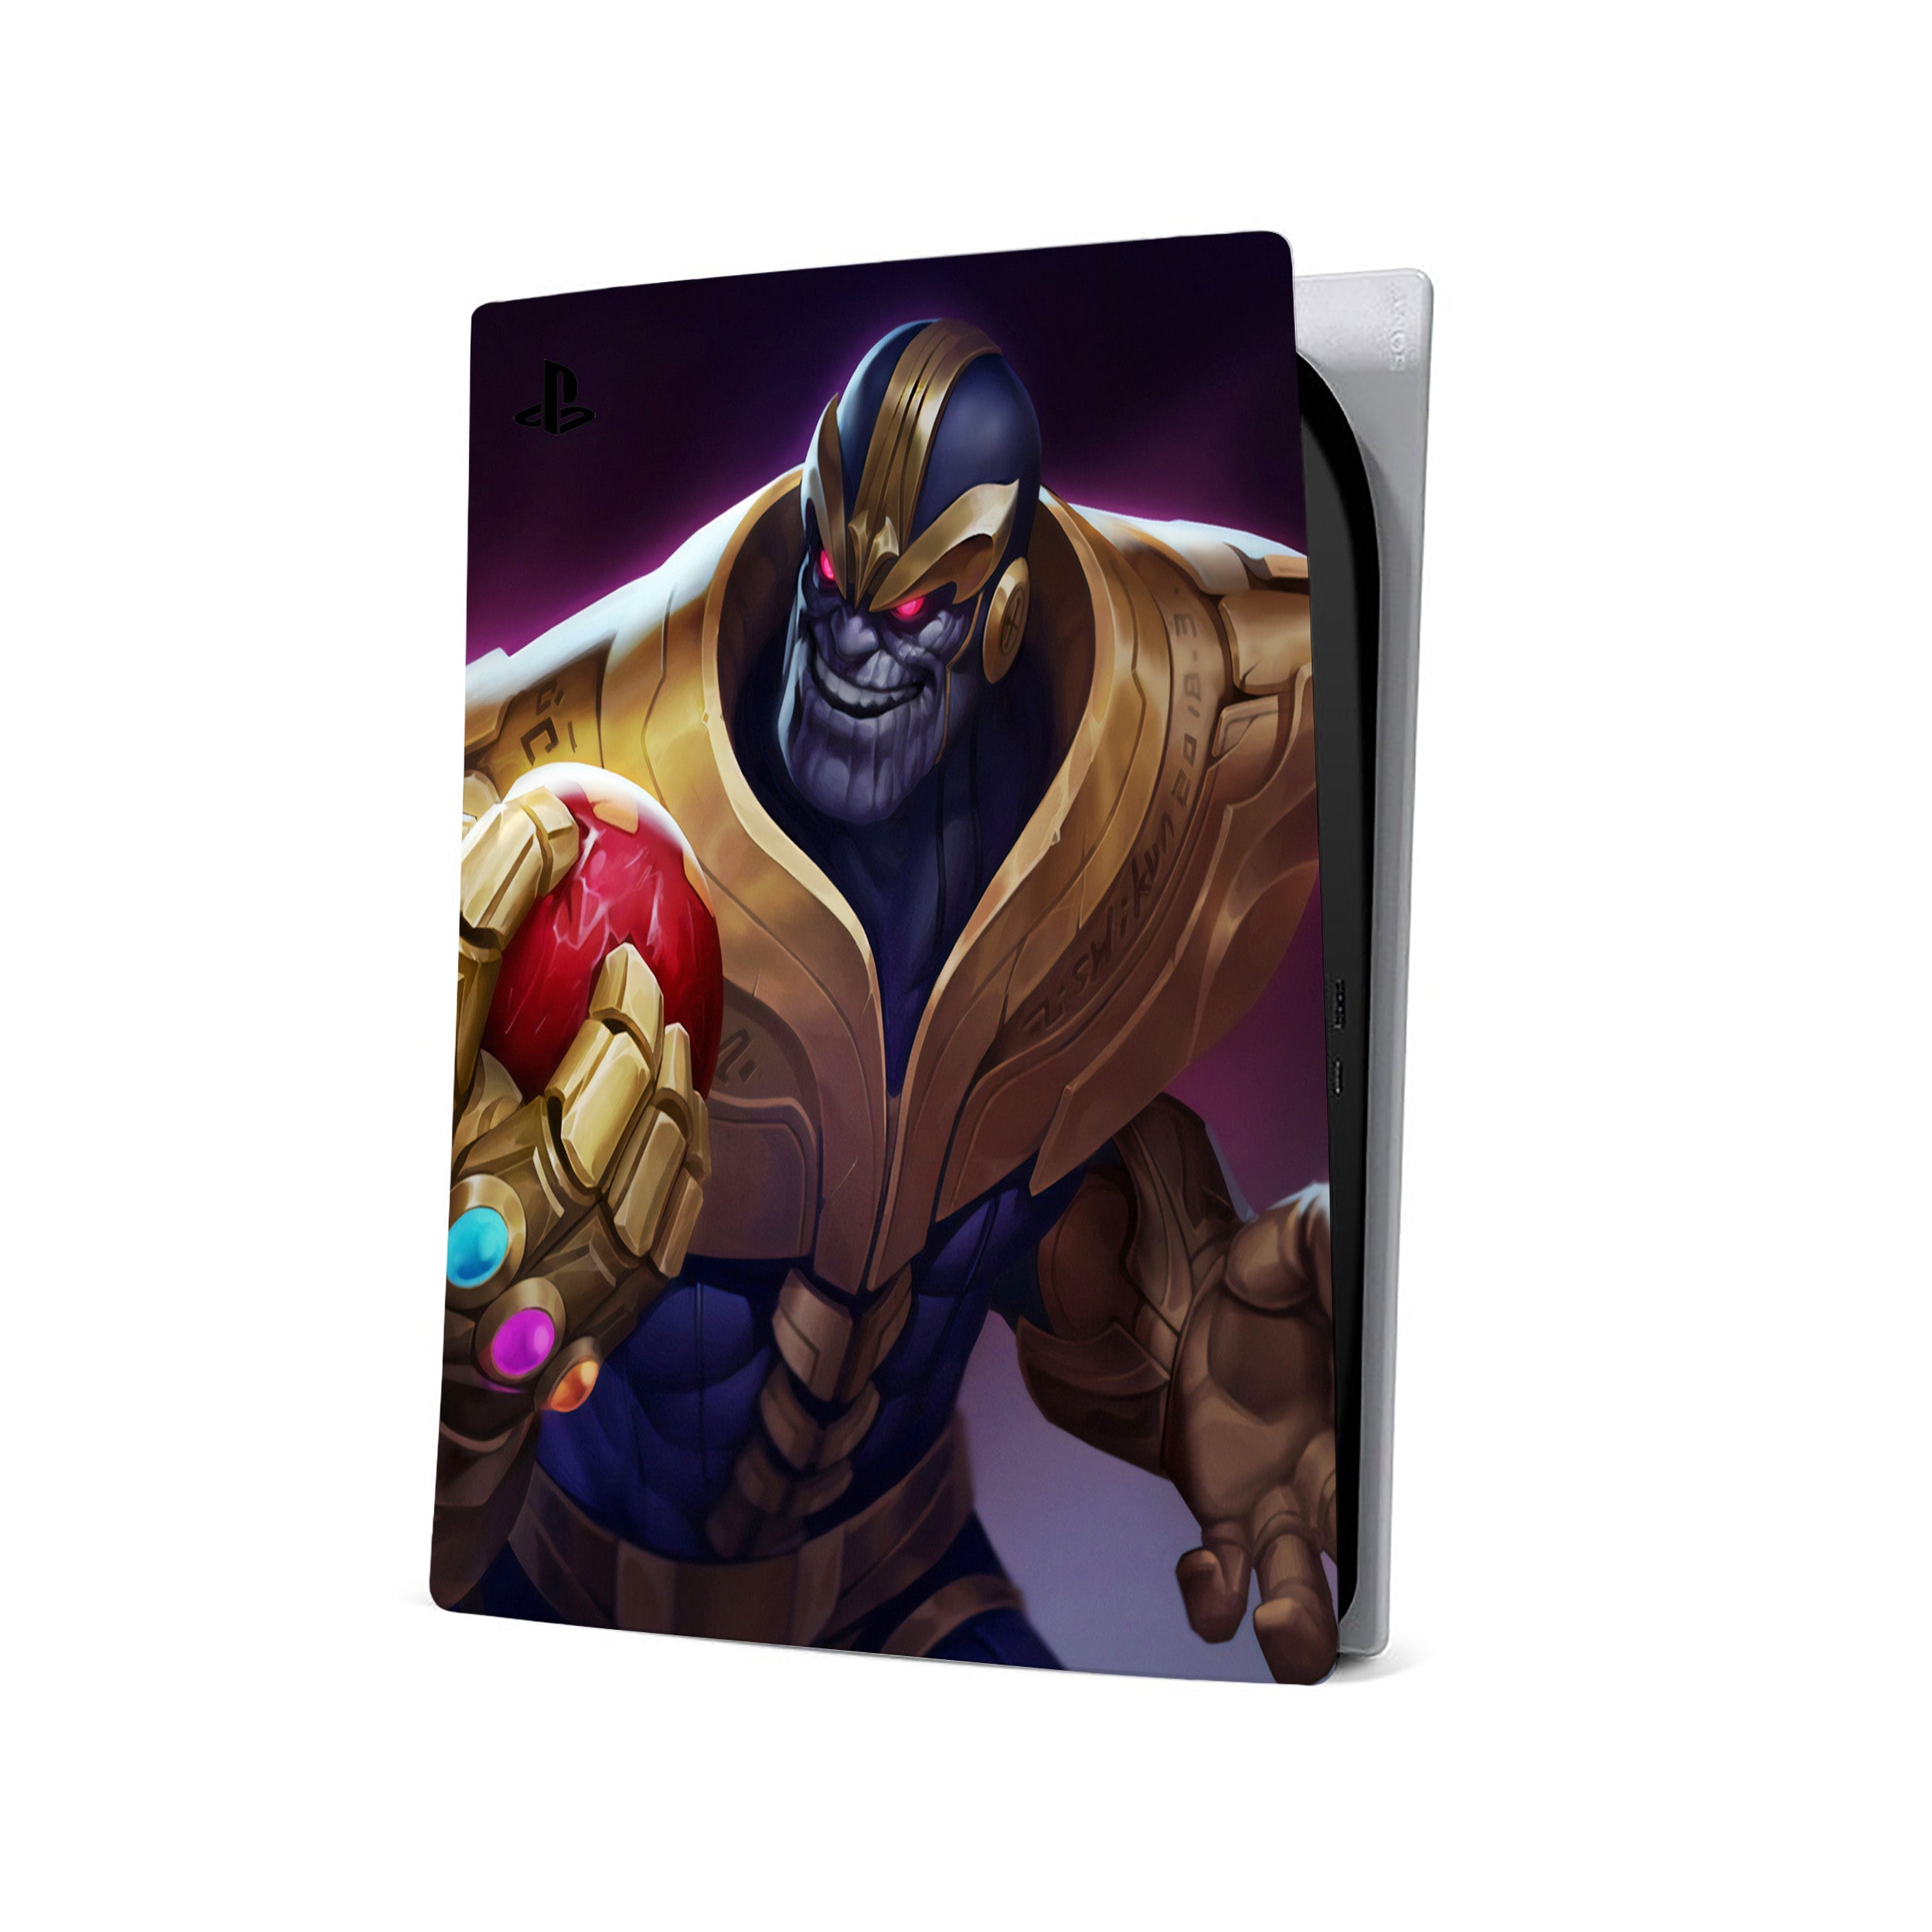 A video game skin featuring a Marvel Comics Thanos design for the PS5.